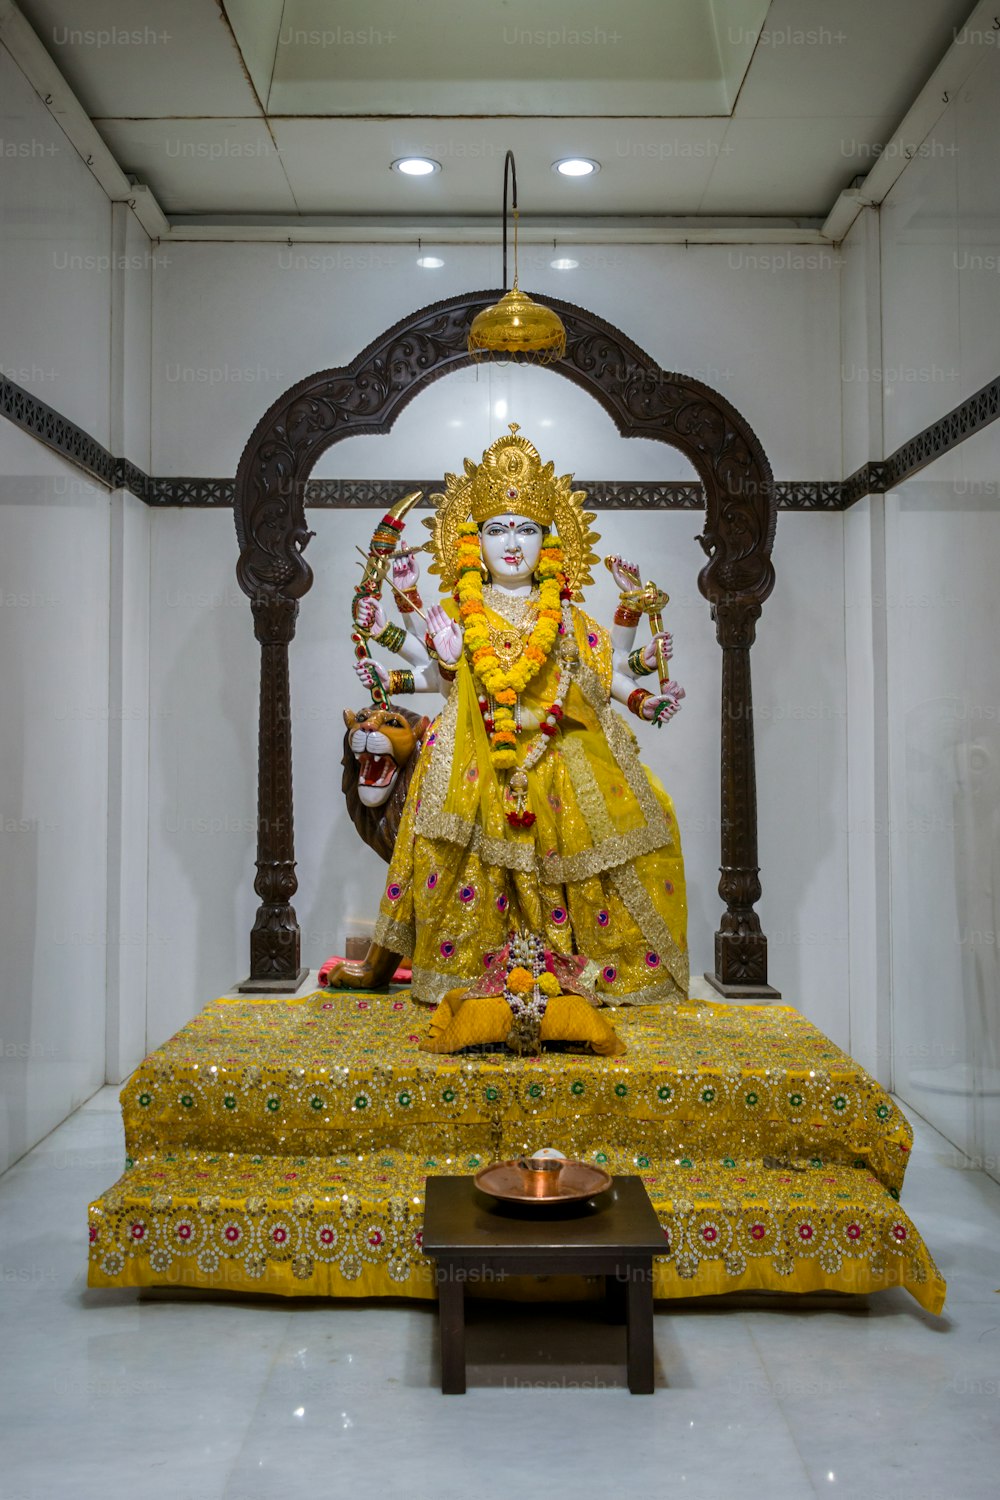 A statue of a hindu god in a room photo – Worship Image on Unsplash